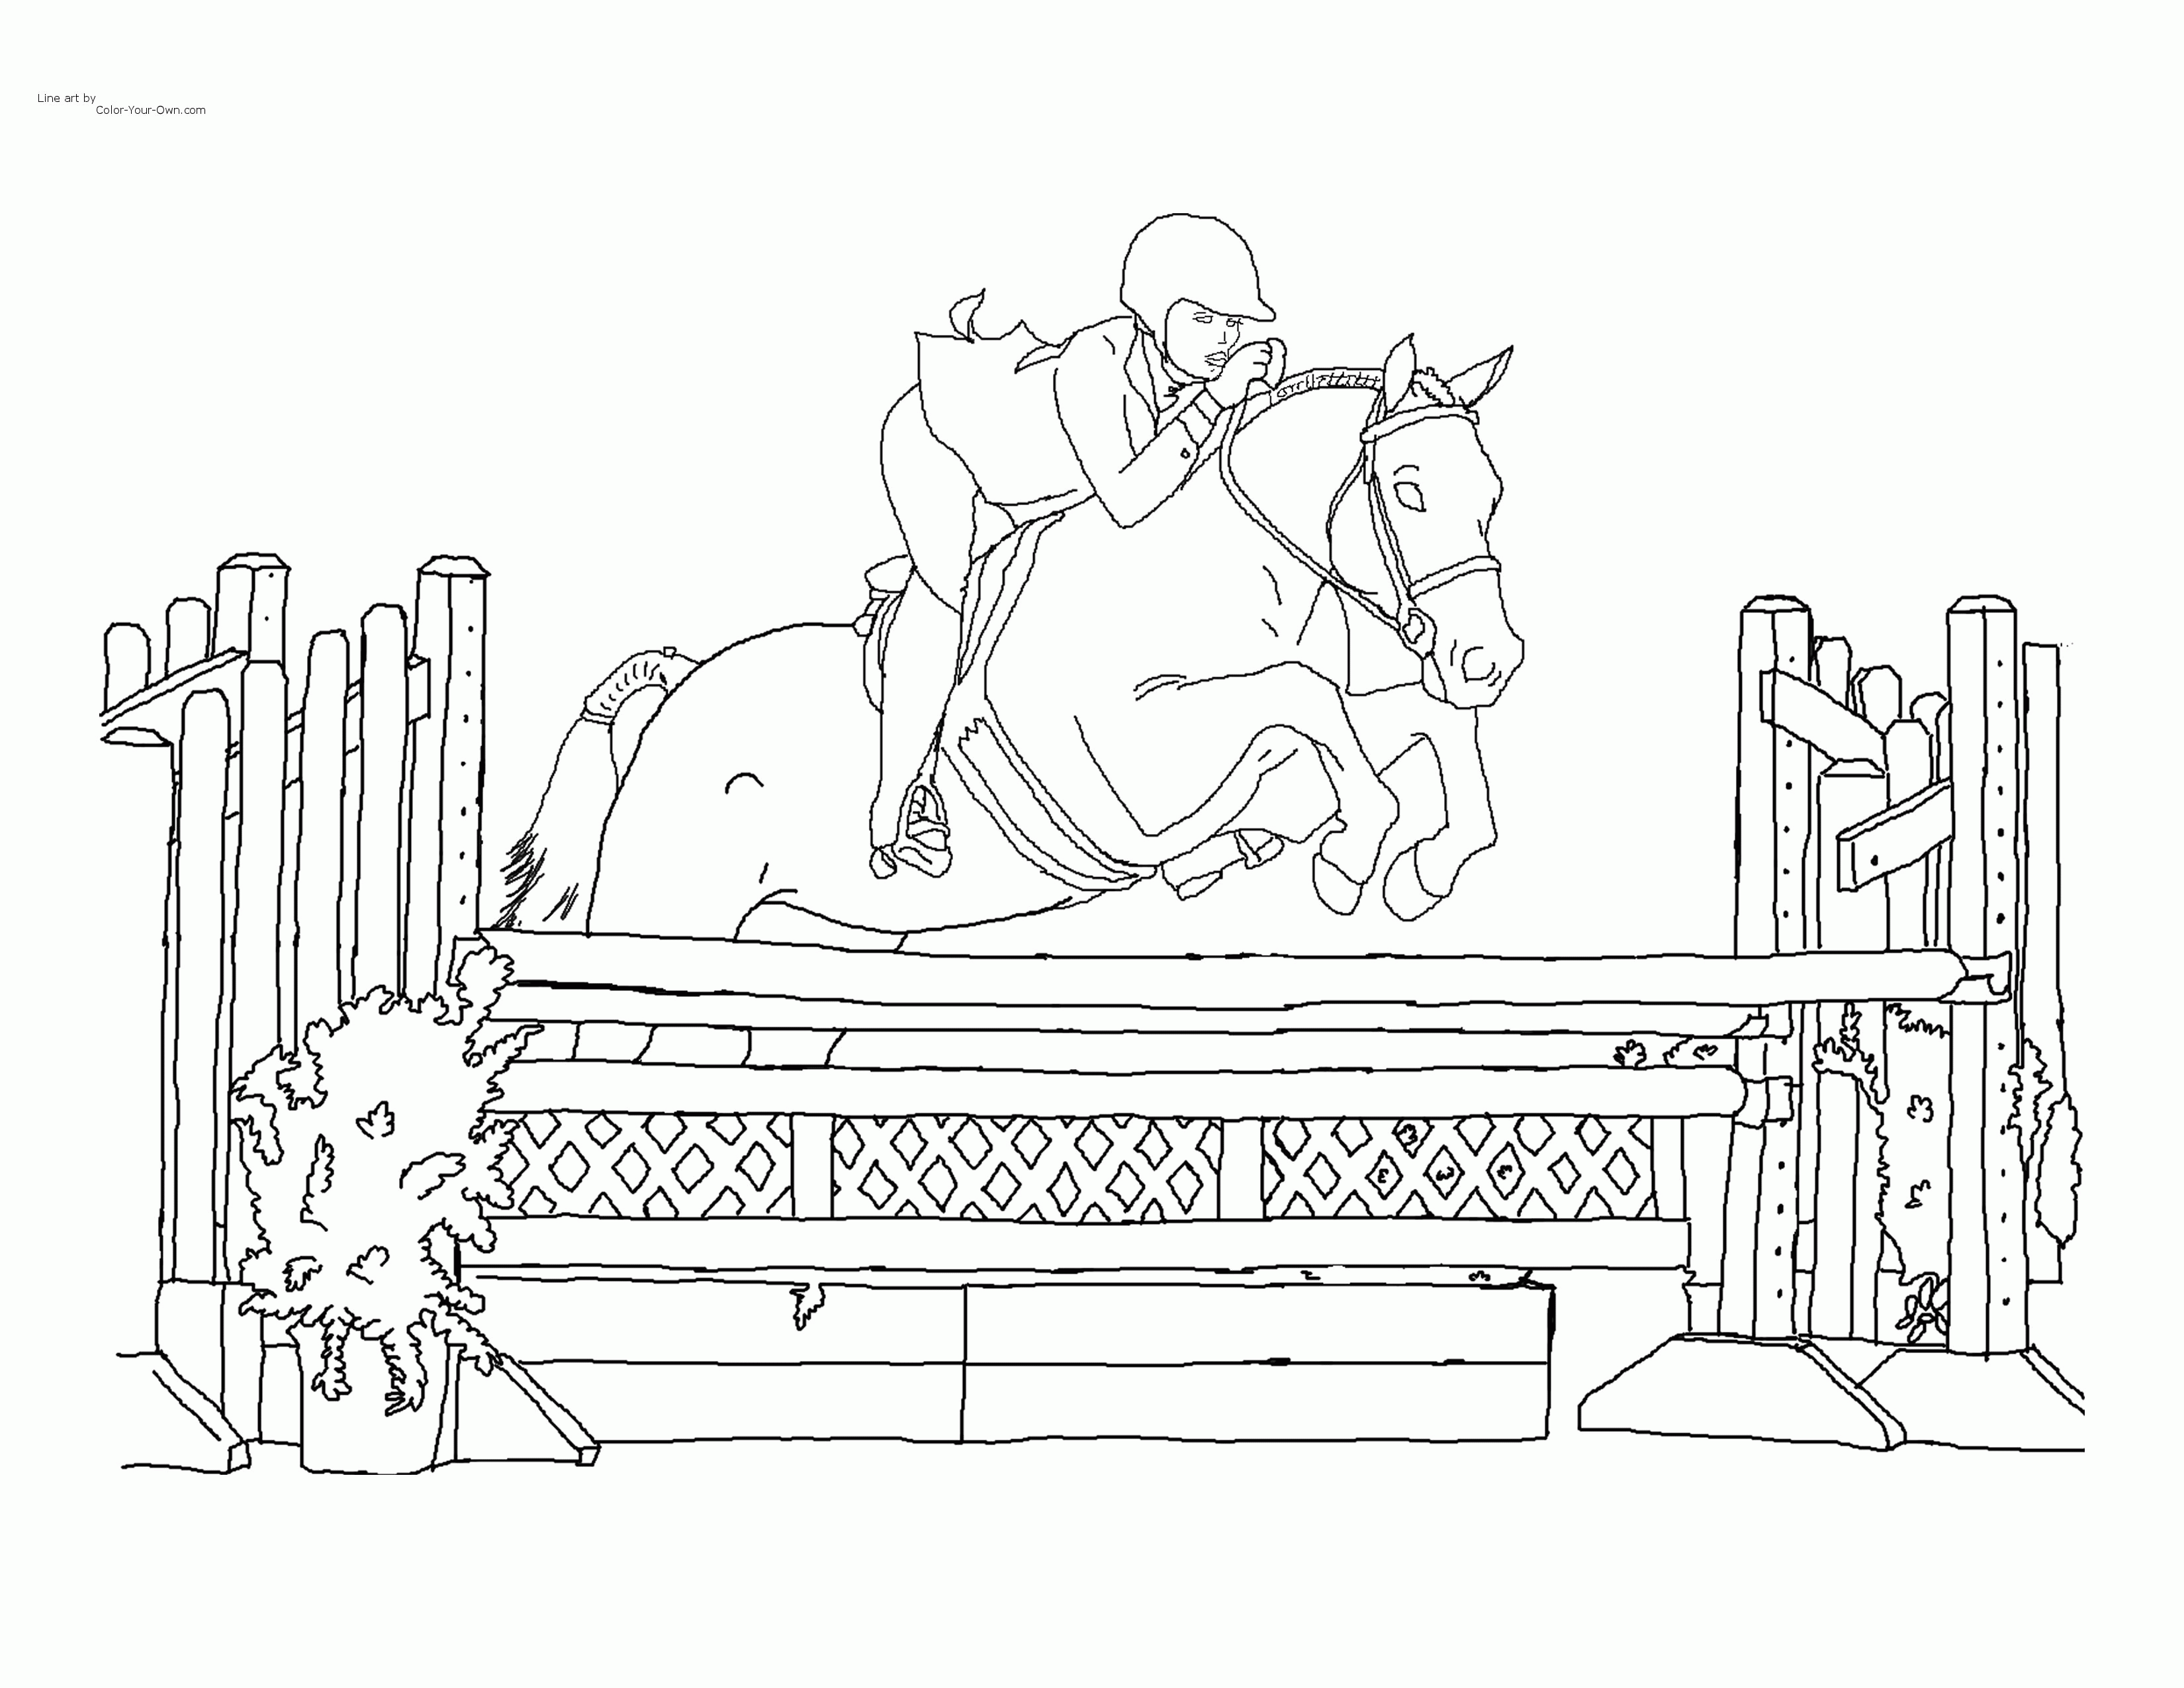 12 Pics of Horse Jumping Coloring Pages To Print - Horse Jumping ...